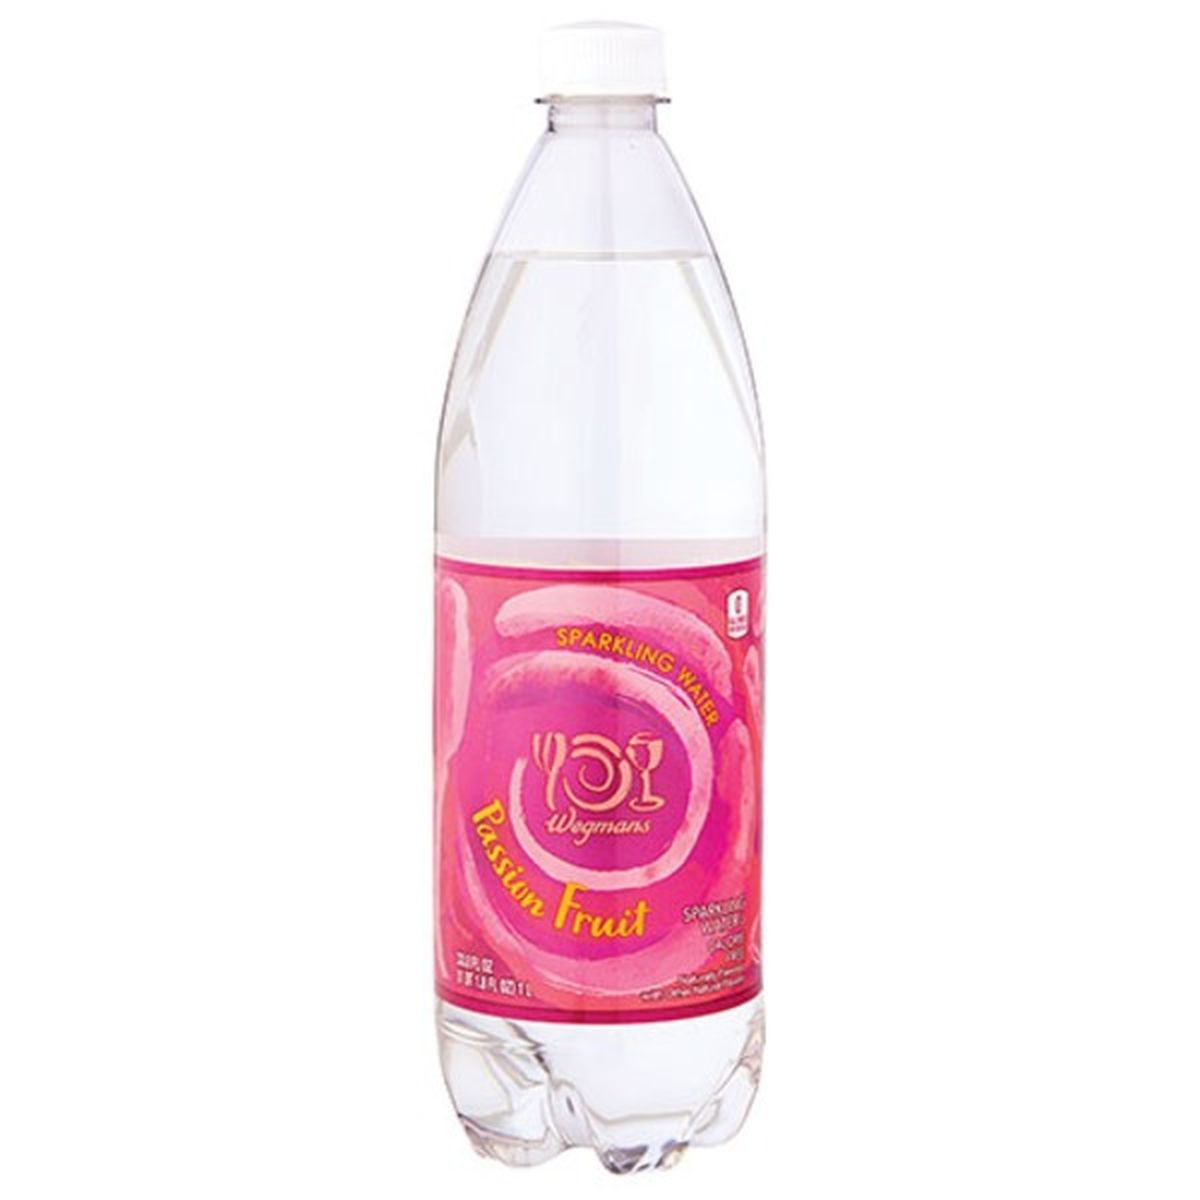 Calories in Wegmans Sparkling Water Passion Fruit